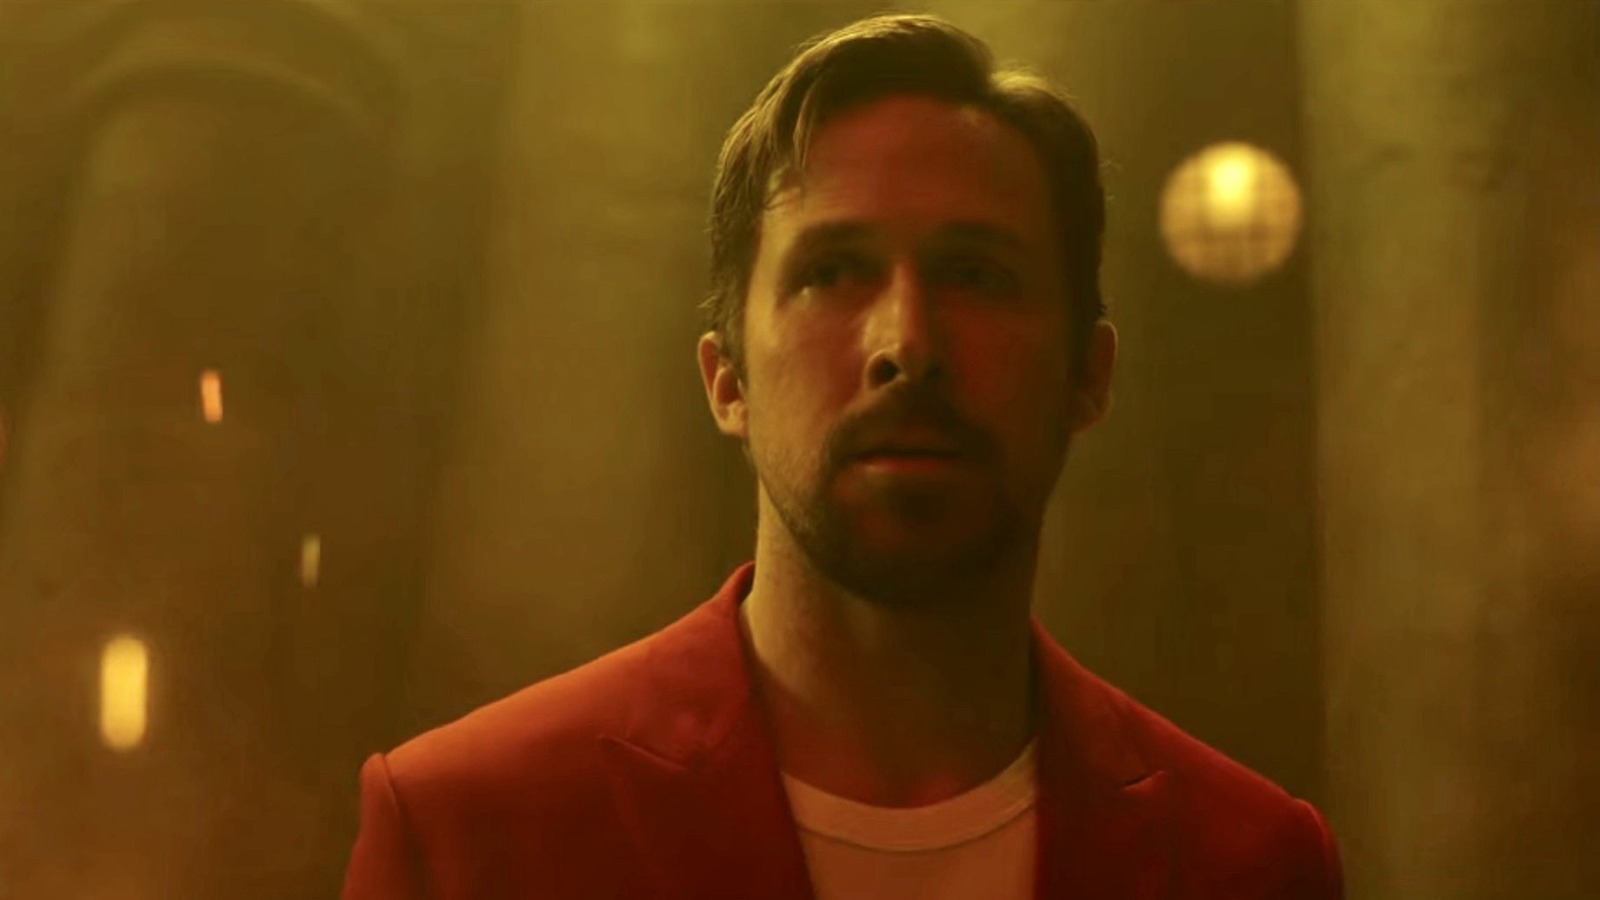 #One Scene Perfectly Summed Up Ryan Gosling’s Gray Man Experience